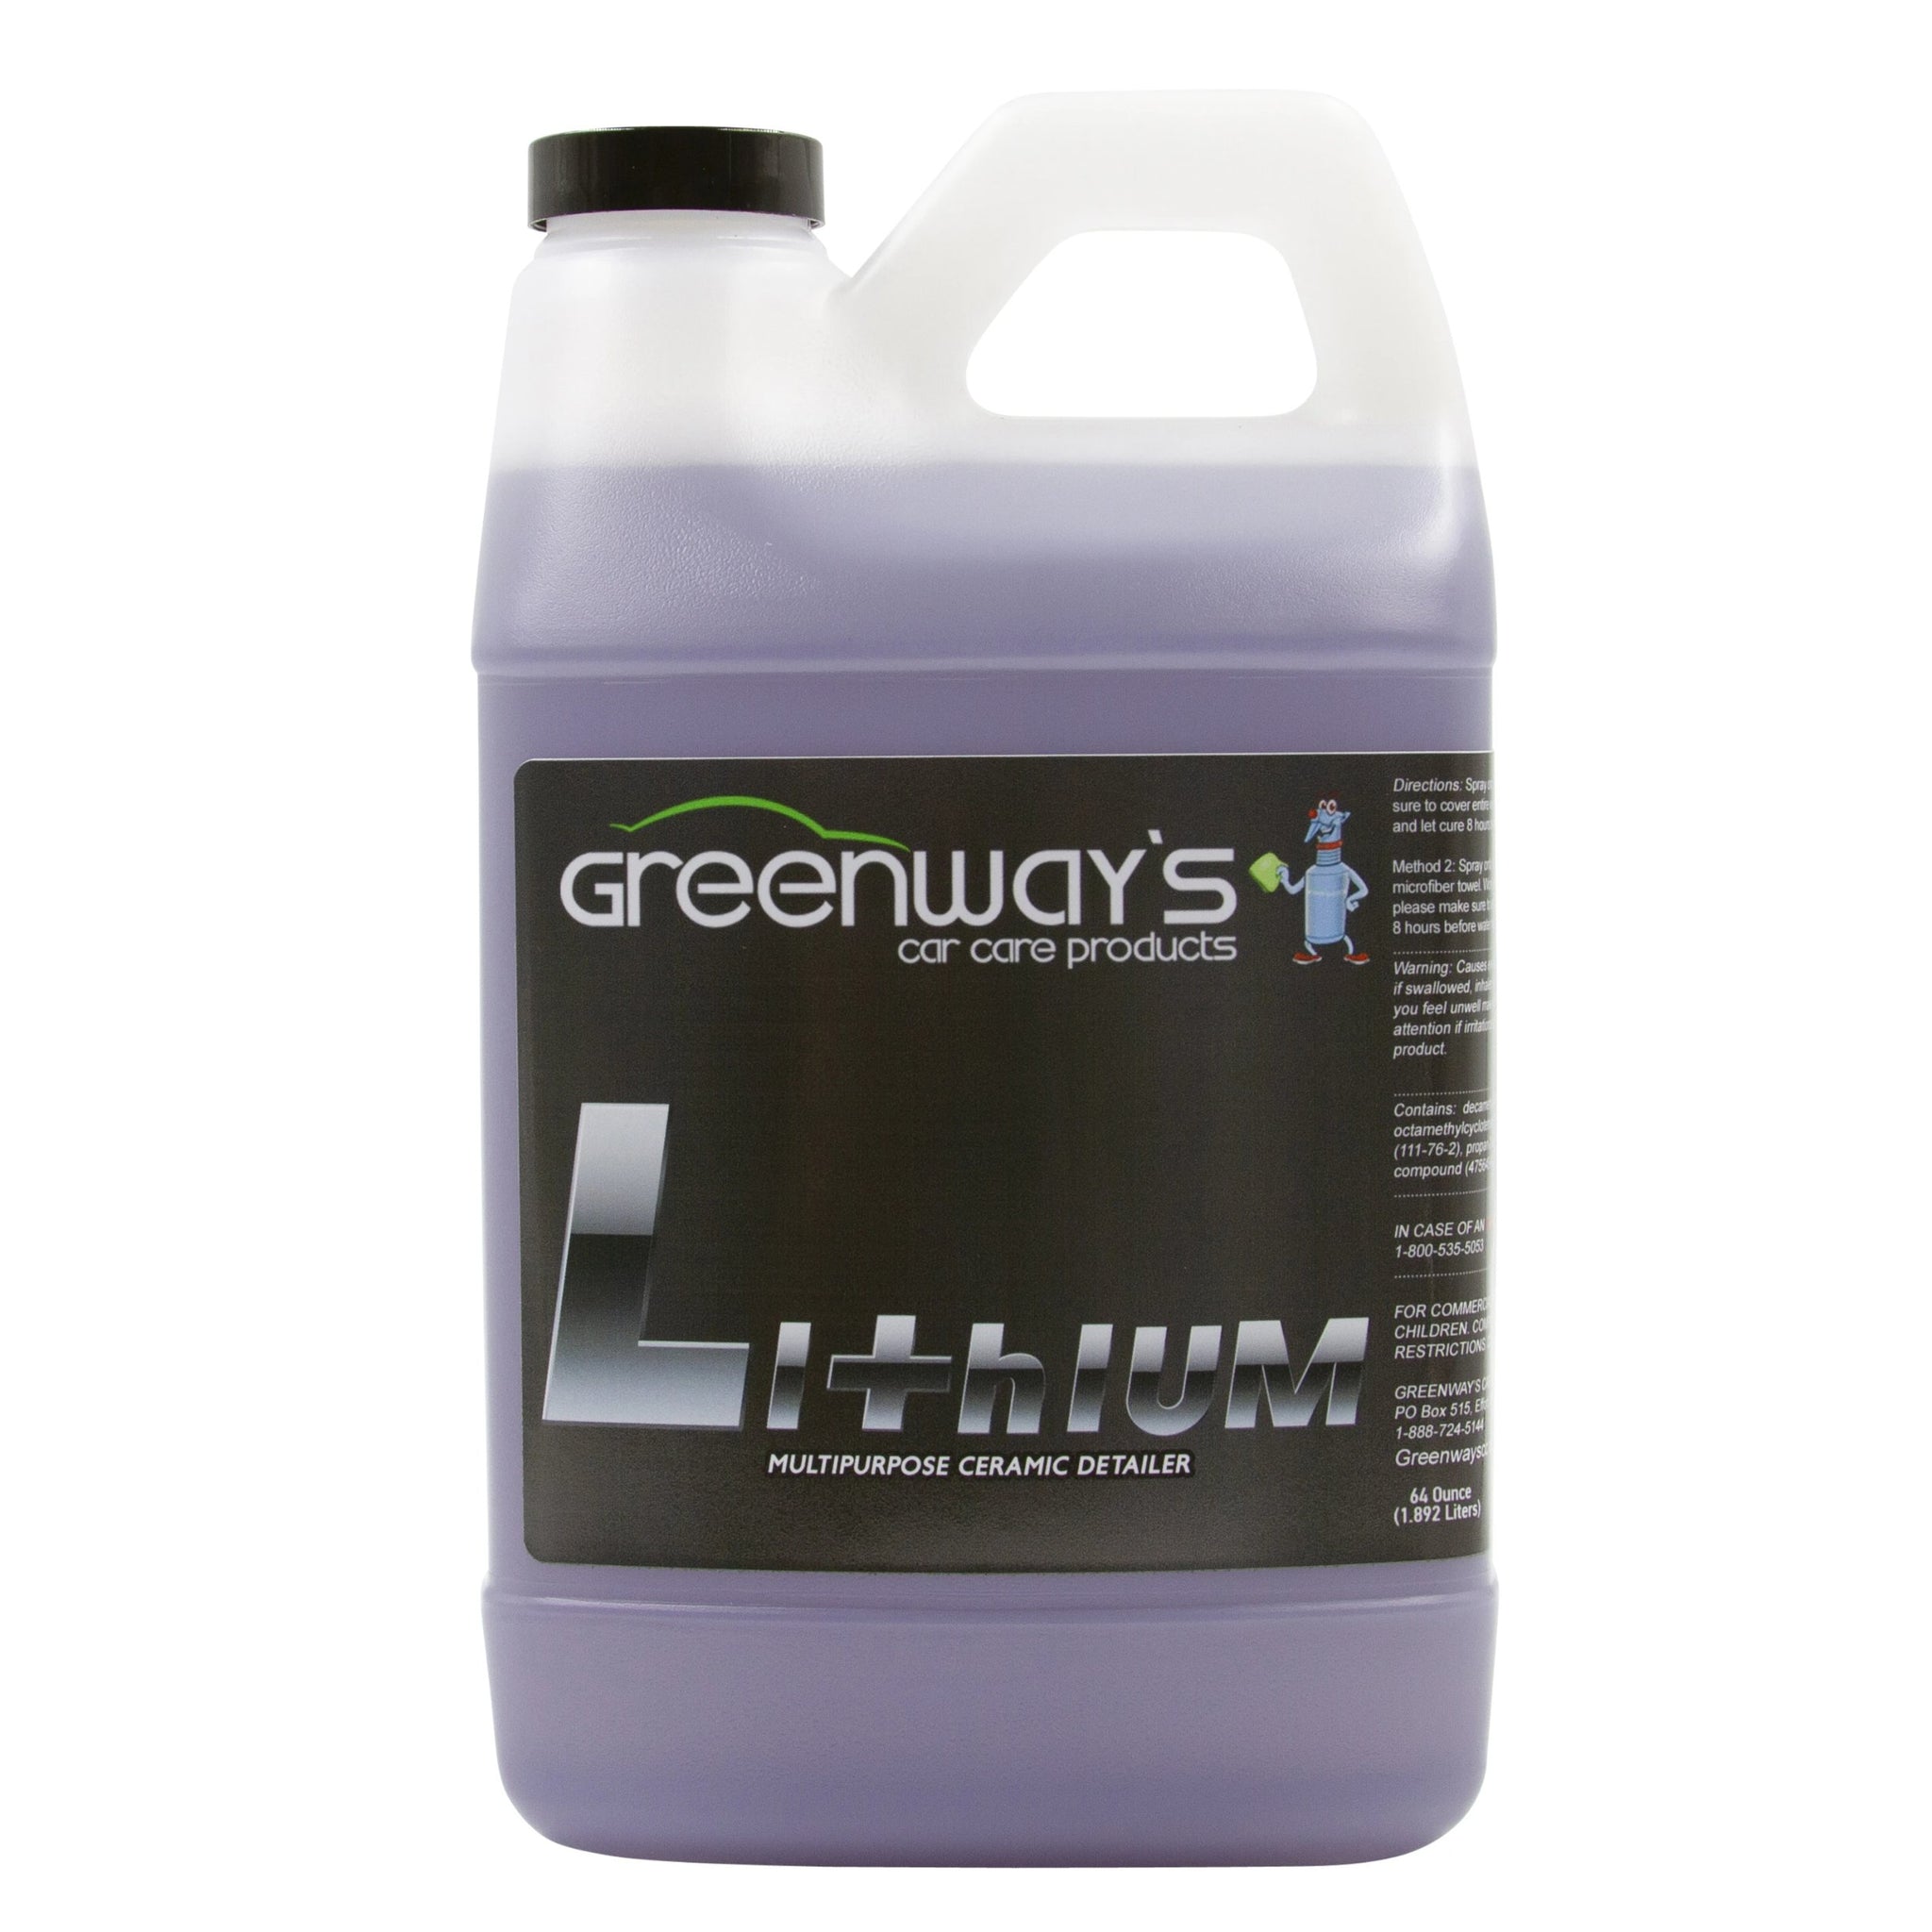 Greenway’s Lithium, graphene ceramic coating car sealant spray, extends current coating for enhanced protection, 64 ounces.